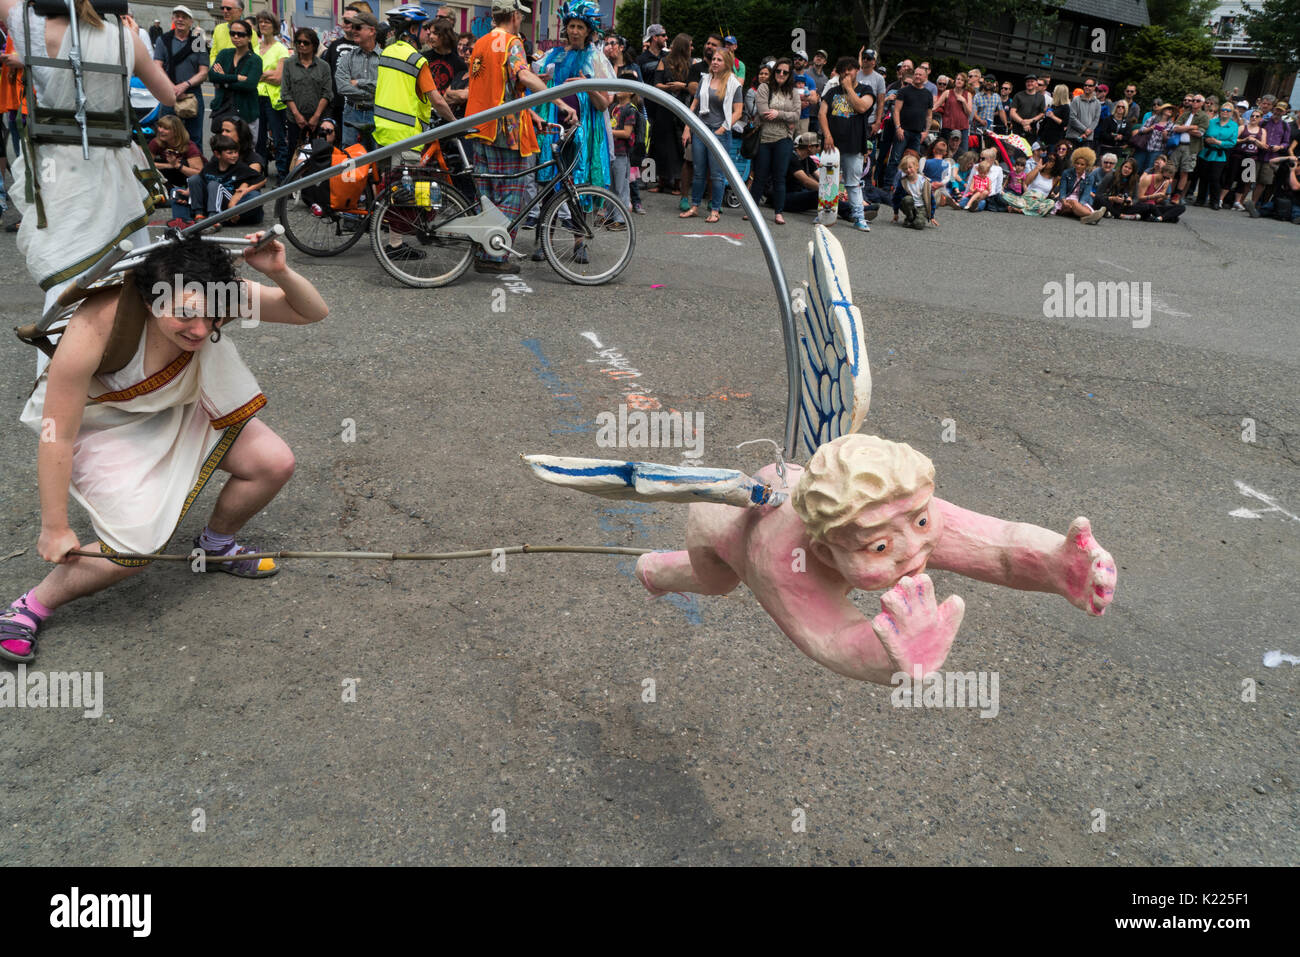 Woman with cherub on a pole that she is having swoop toward to spectators at street's edge. Stock Photo